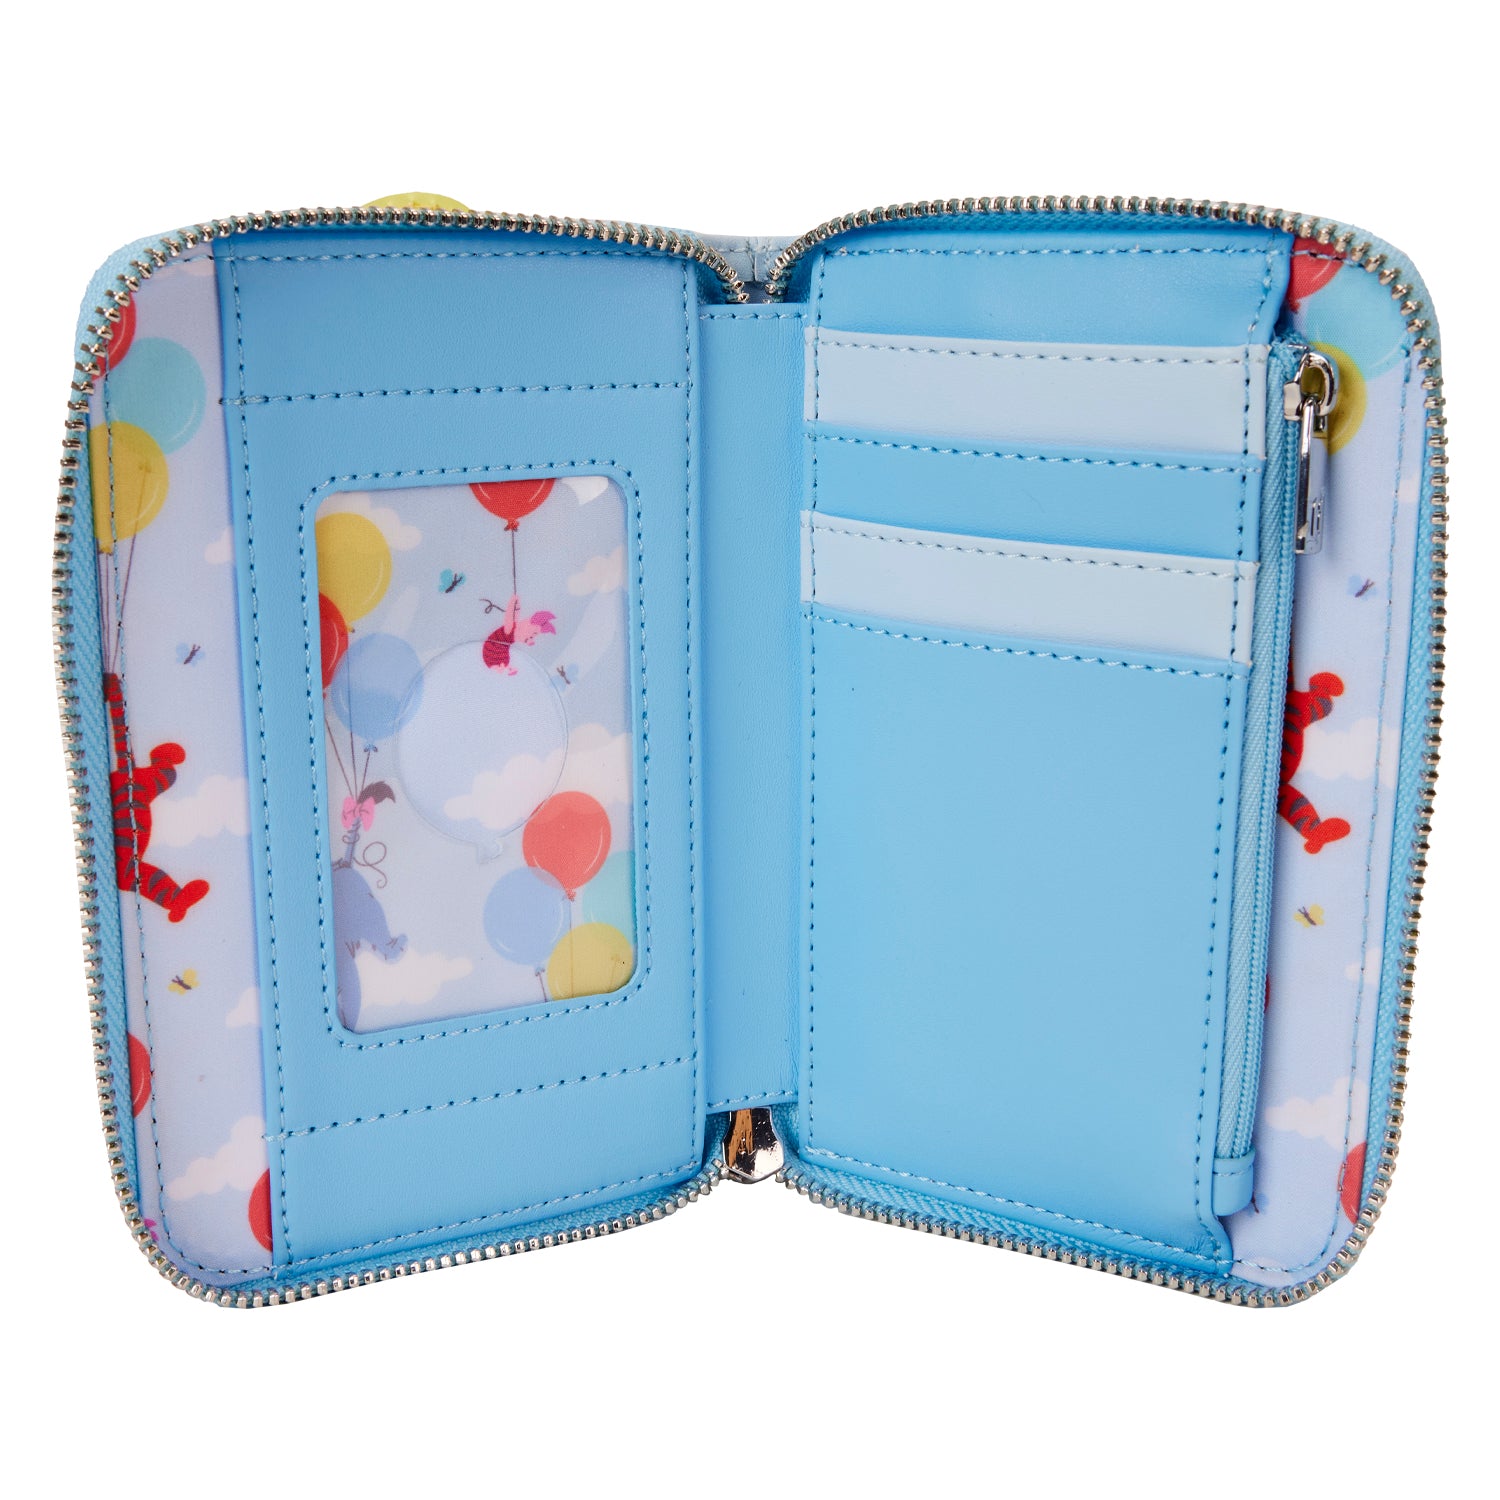 Loungefly x Disney Winnie the Pooh Balloons Wallet